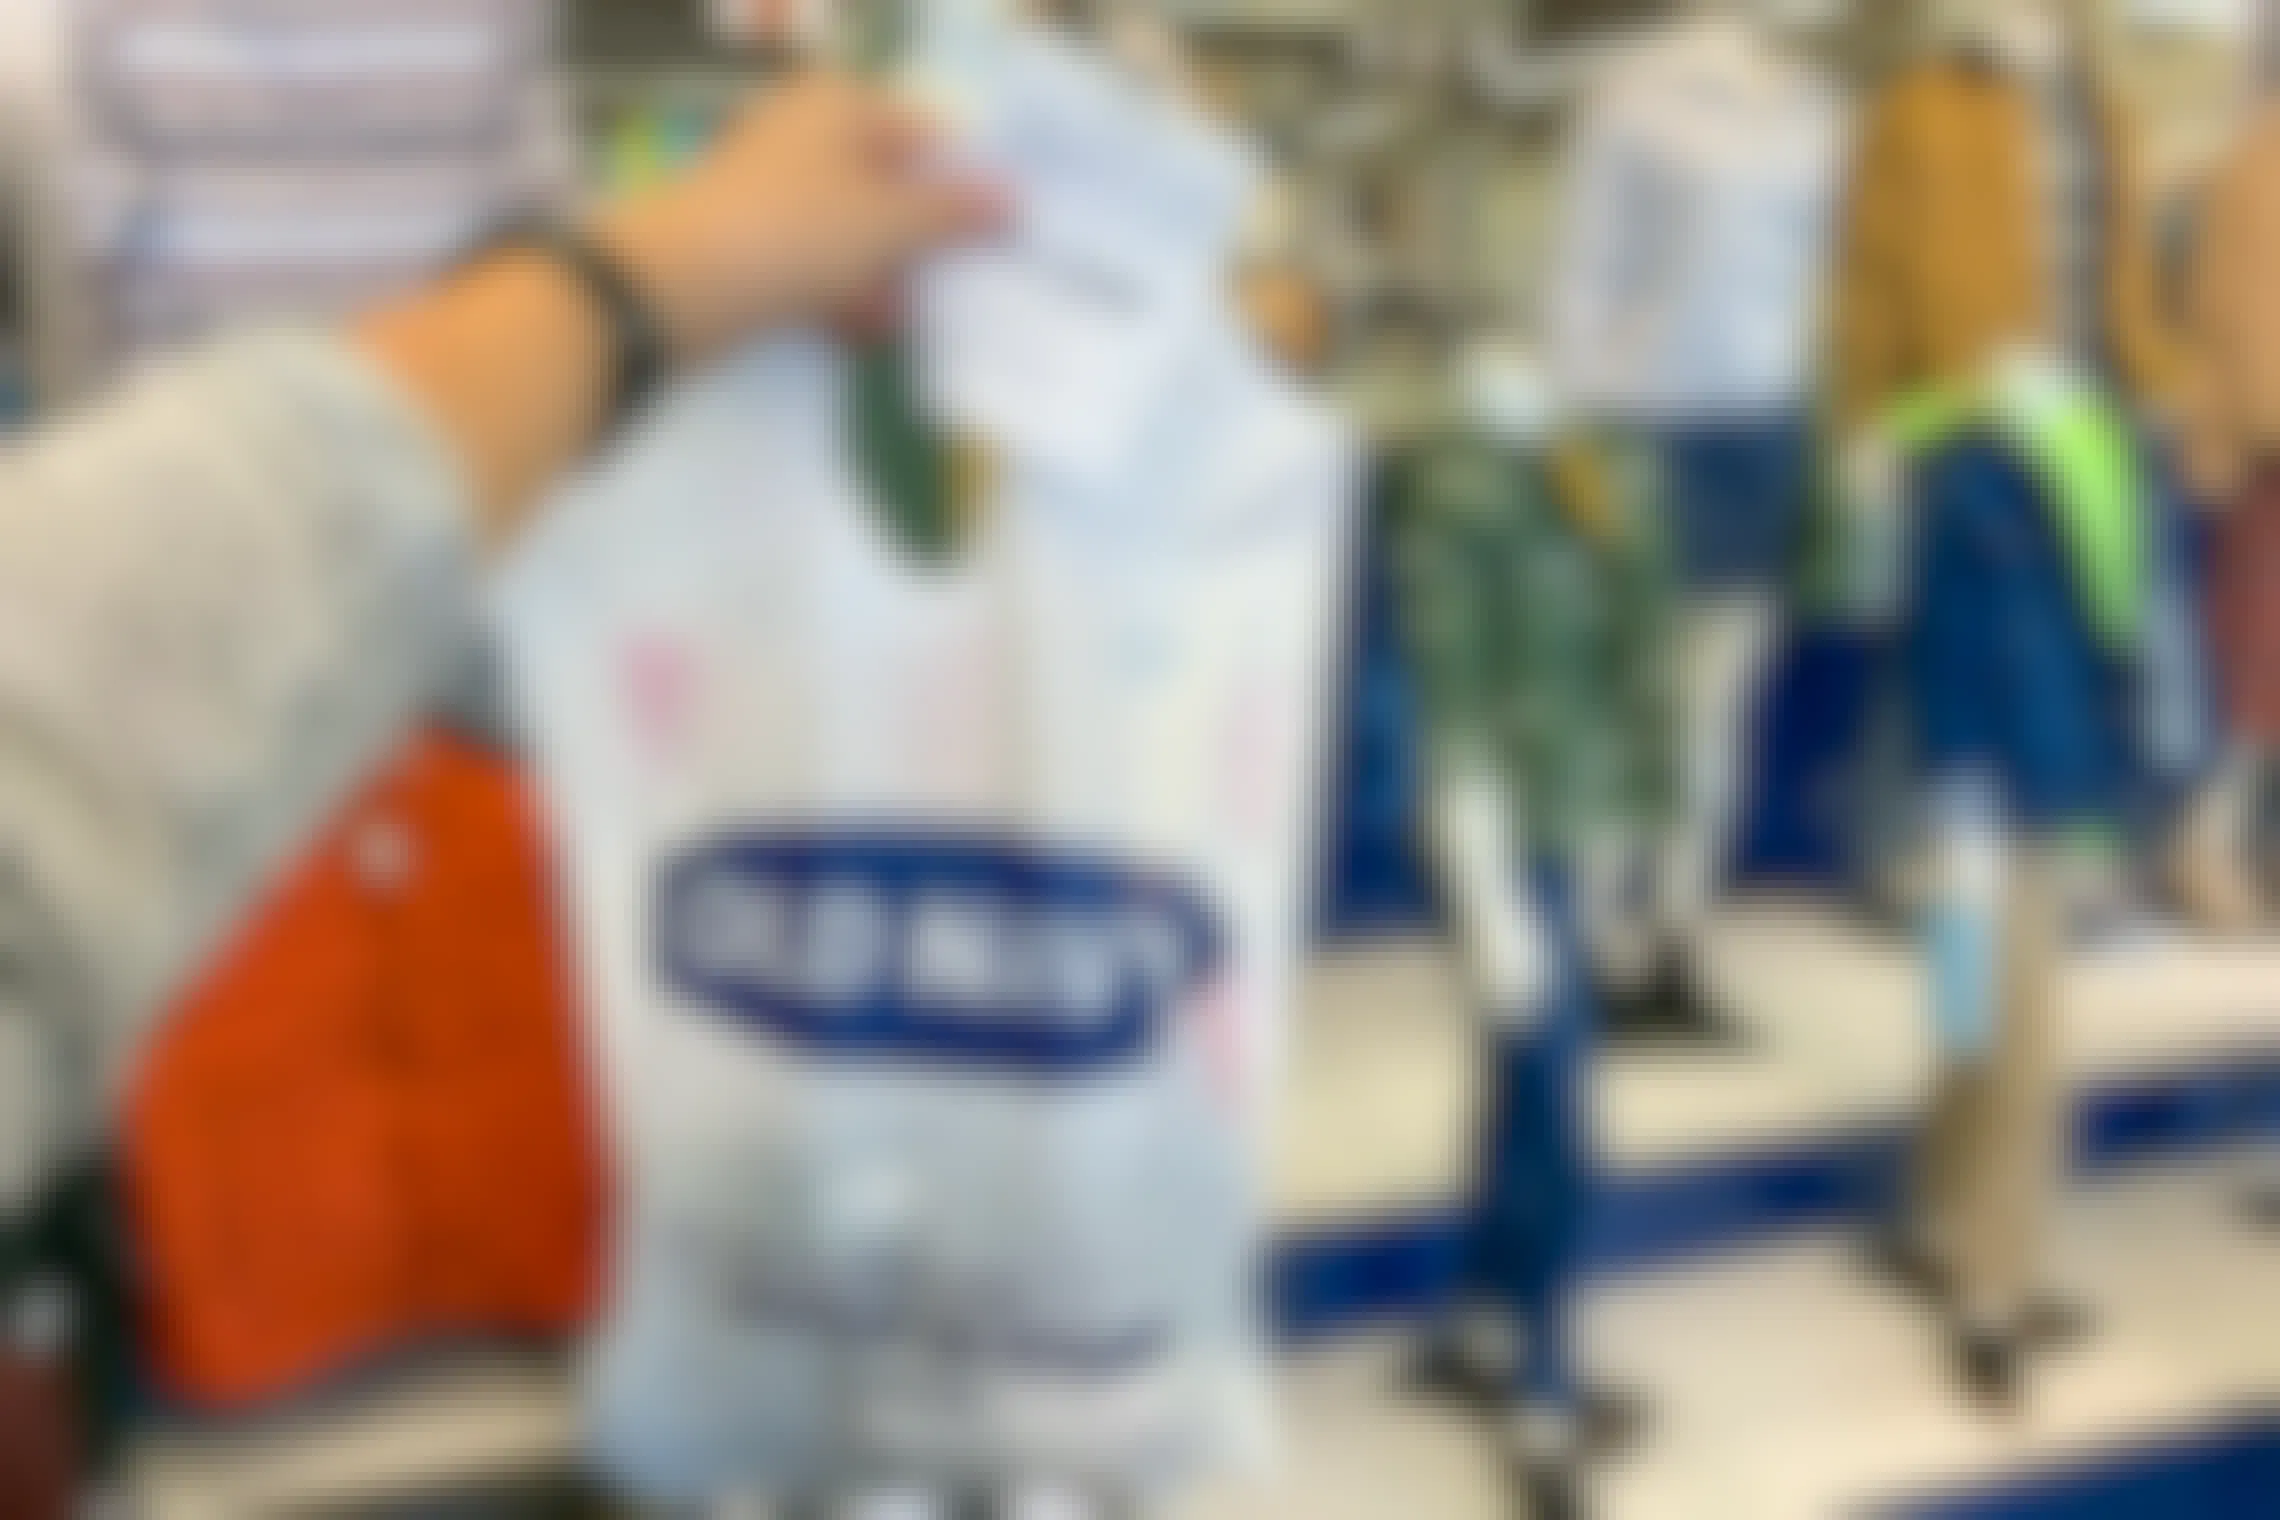 Gift receipt held in front of an old navy bag